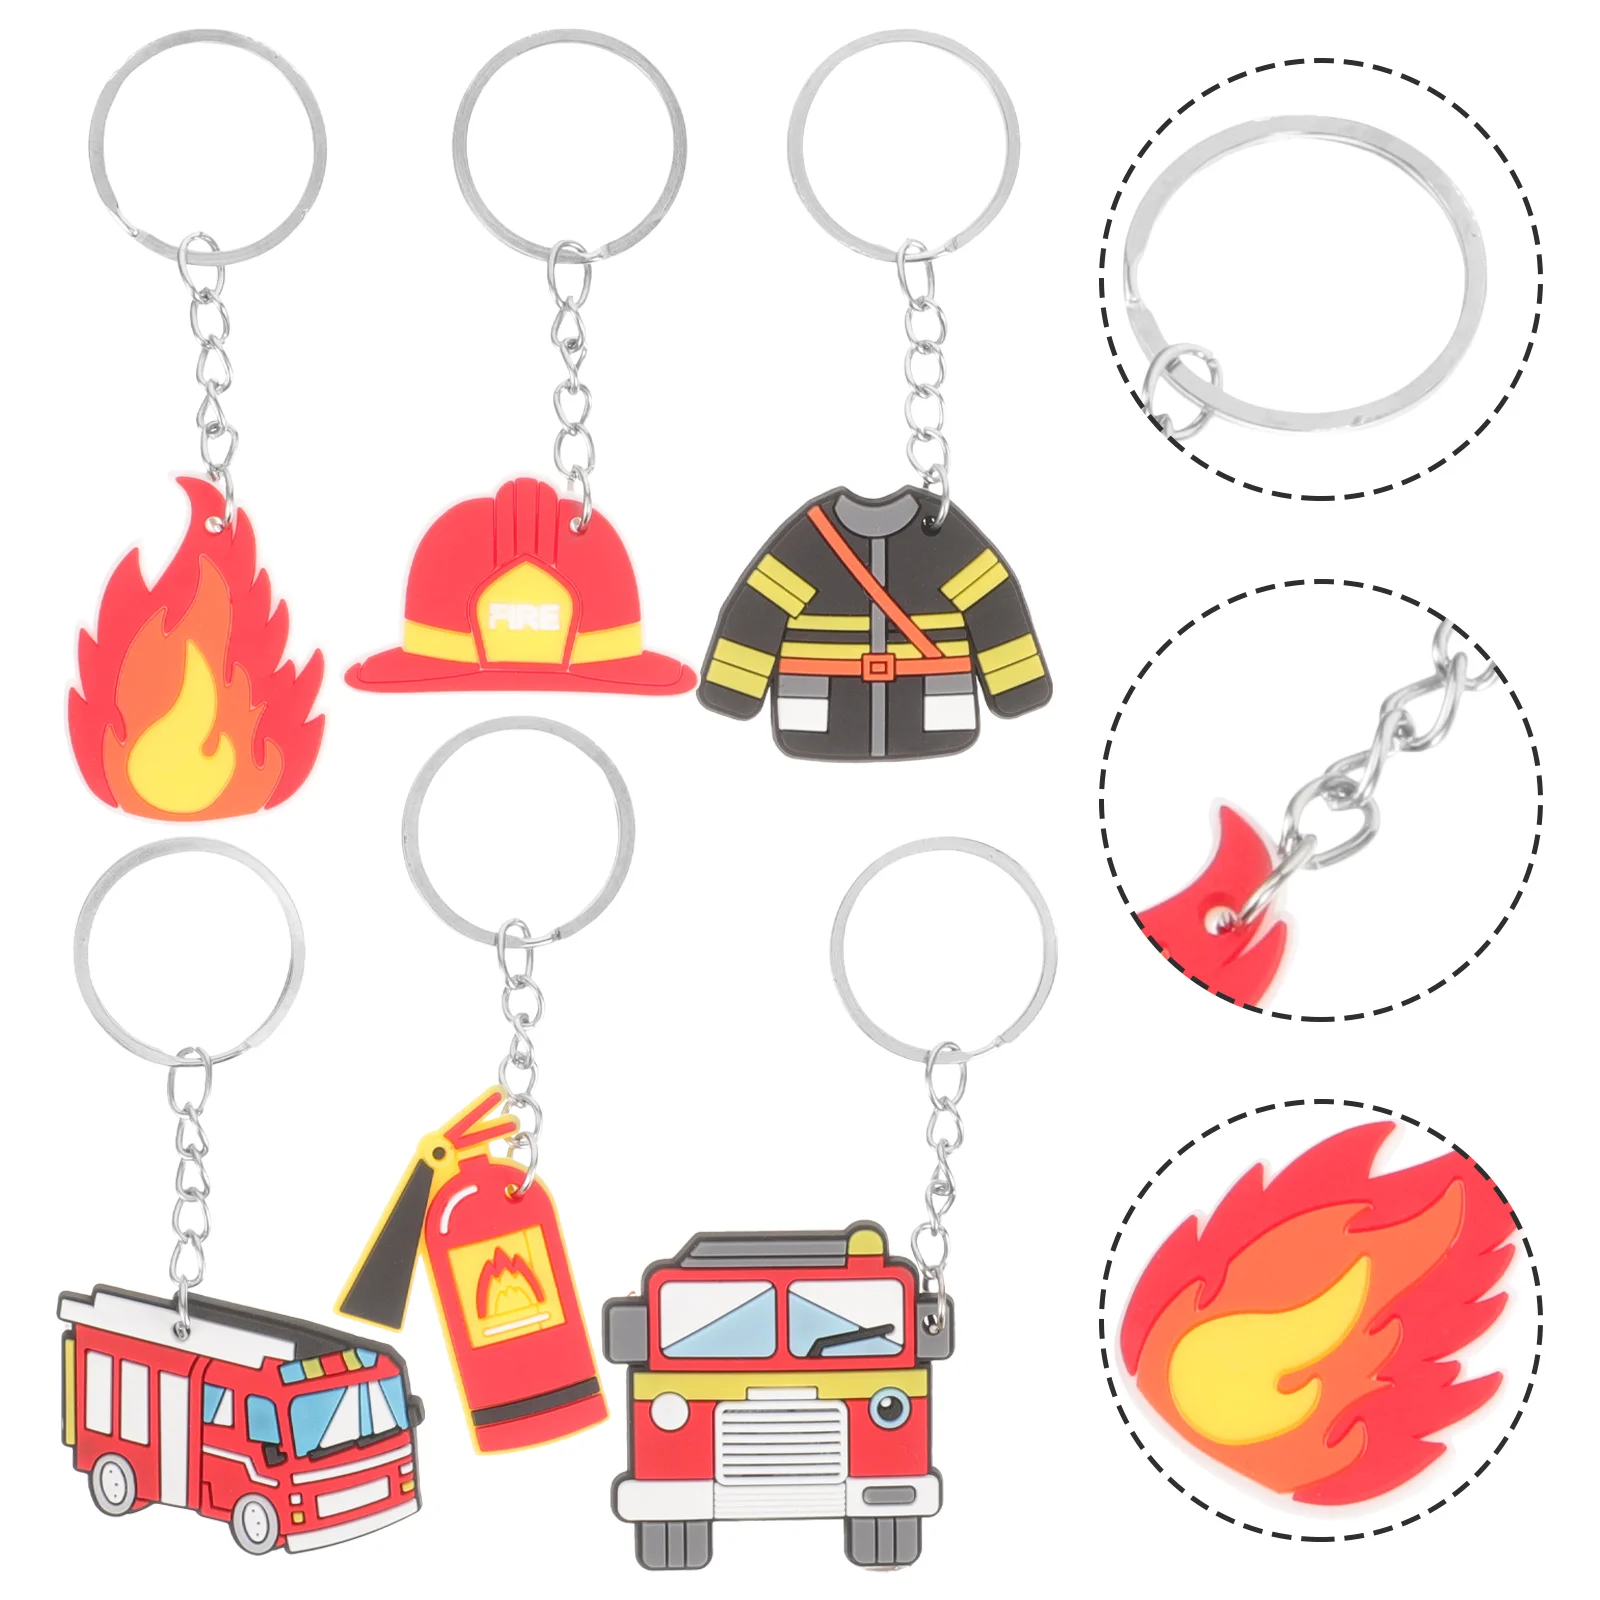 

Firefighter Keychains Plastic Cartoon Fireman Themed Key Chains Metal Souvenir Gifts Key Rings Ornaments Party Favors Goodie Bag